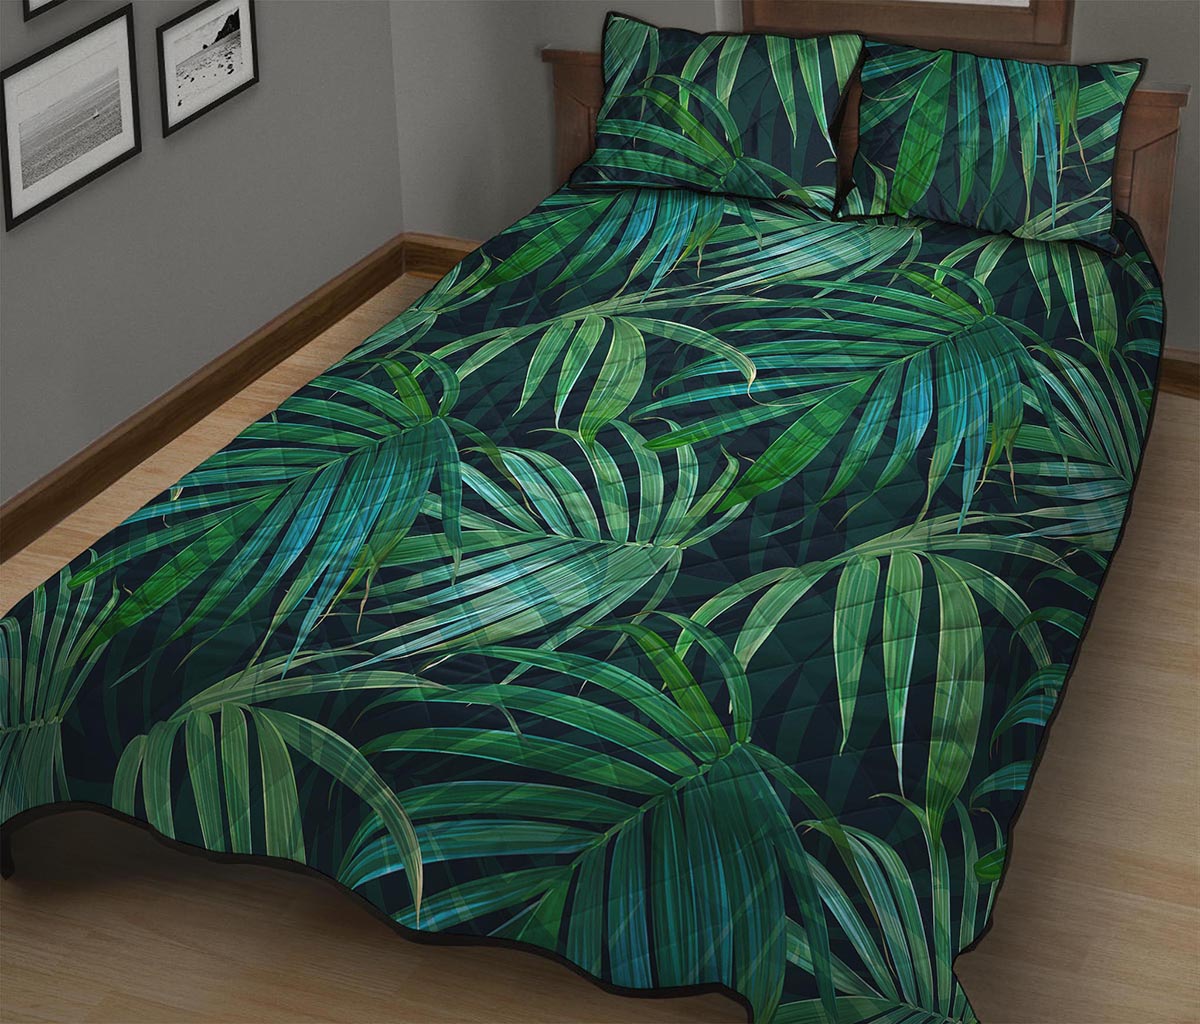 Dark Tropical Palm Leaves Pattern Print Quilt Bed Set